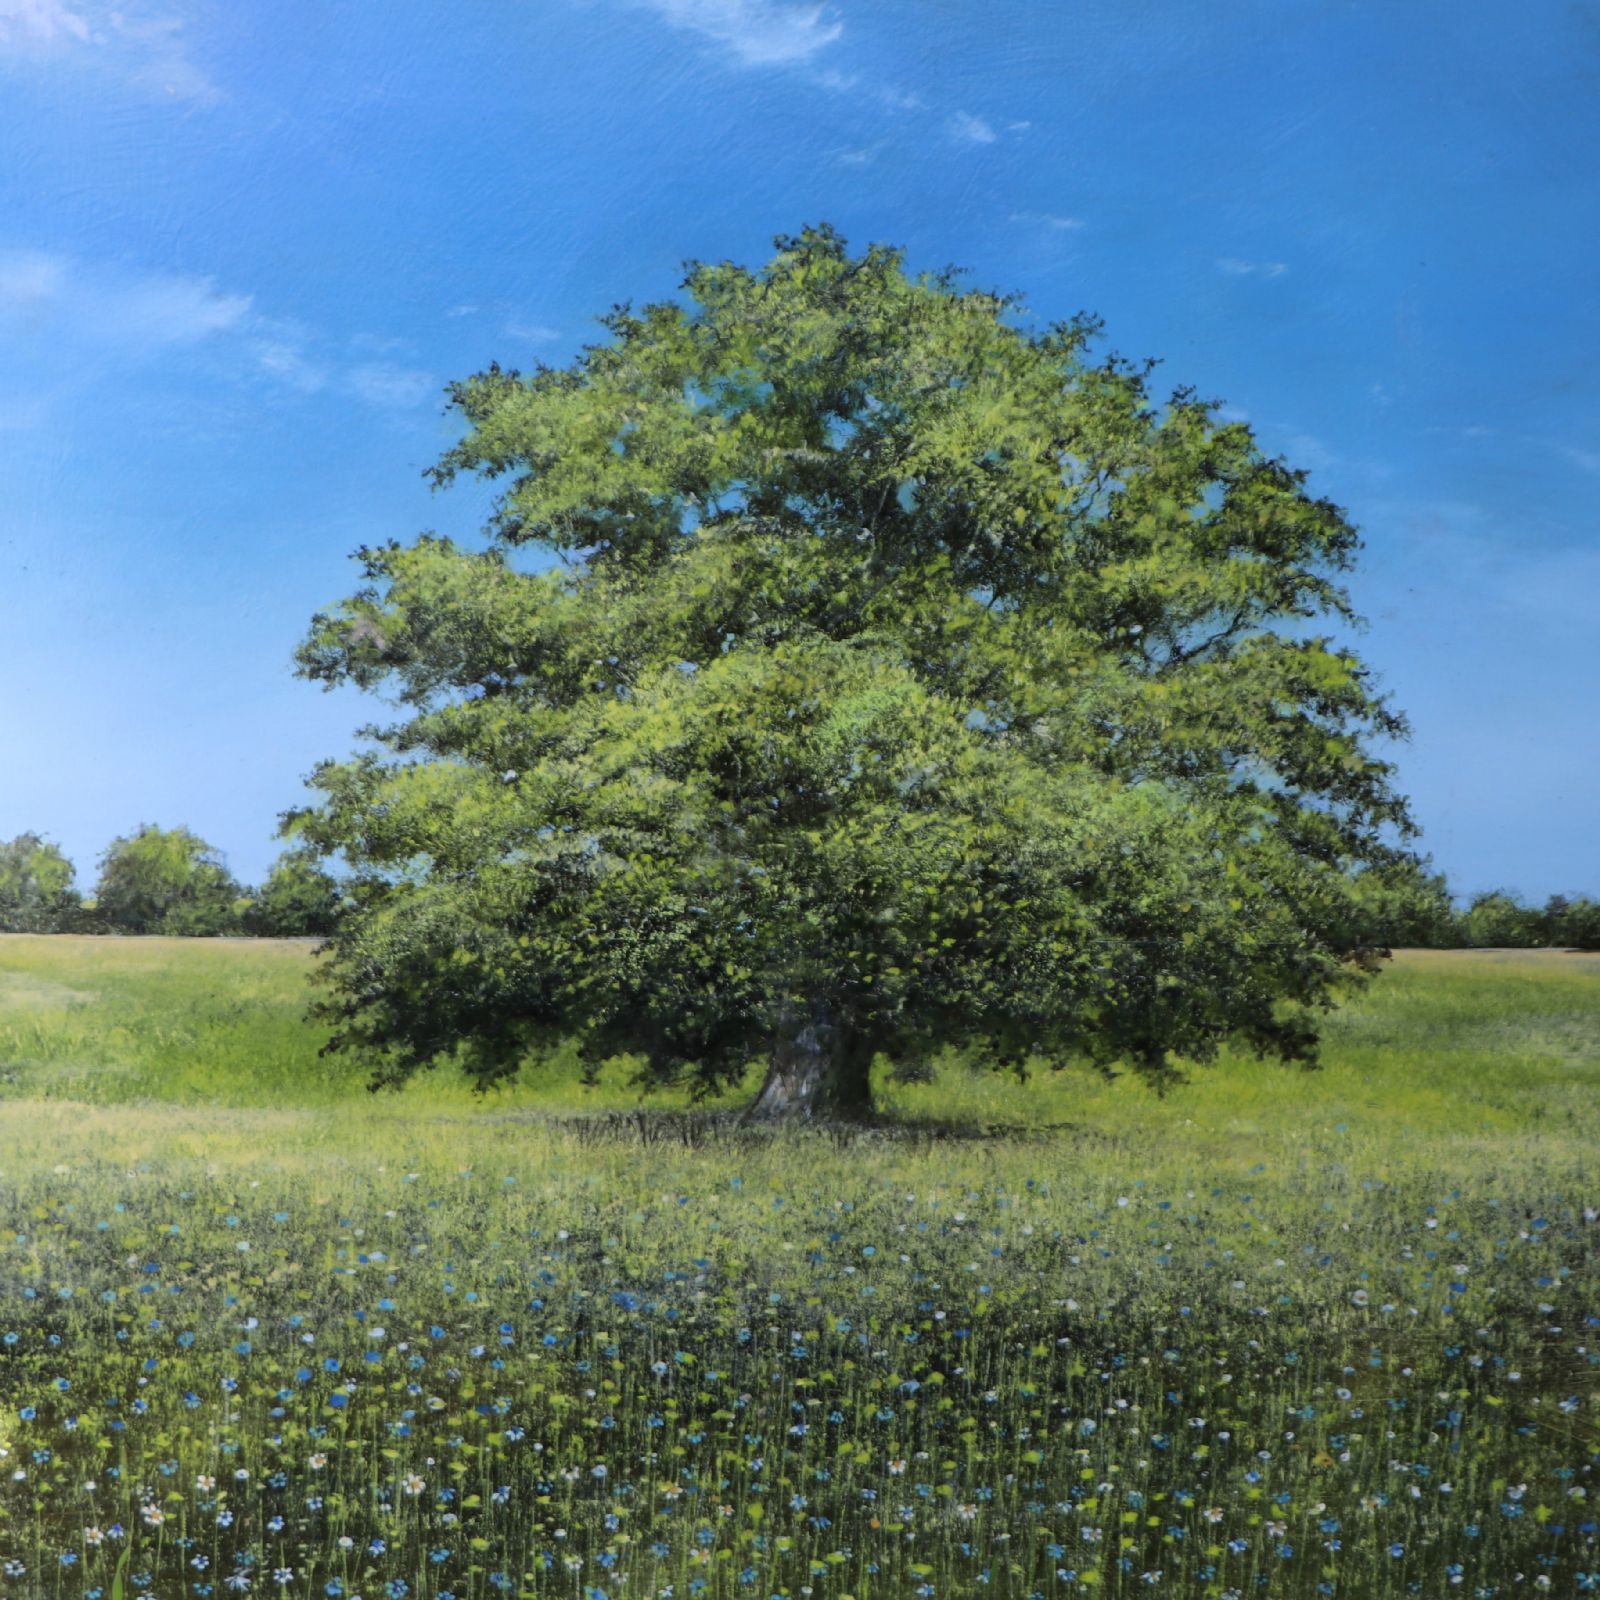 And the Ancient Oak and Cornflowers  by Garry Pereira